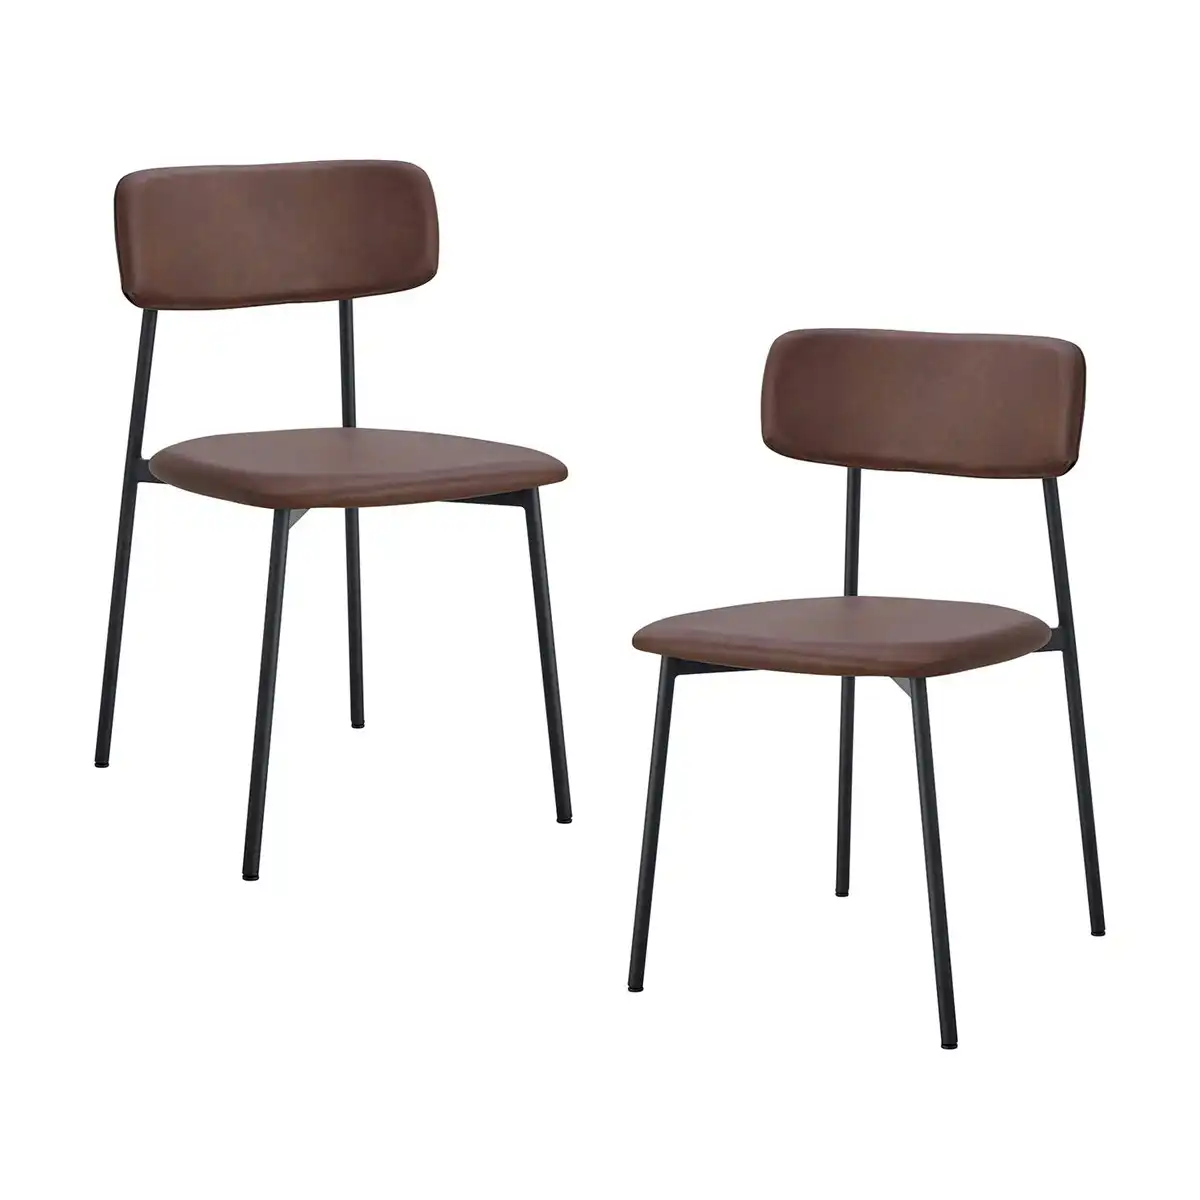 Bailey Leatherette Dining Chair (Set of 2, Black, Chocolate)